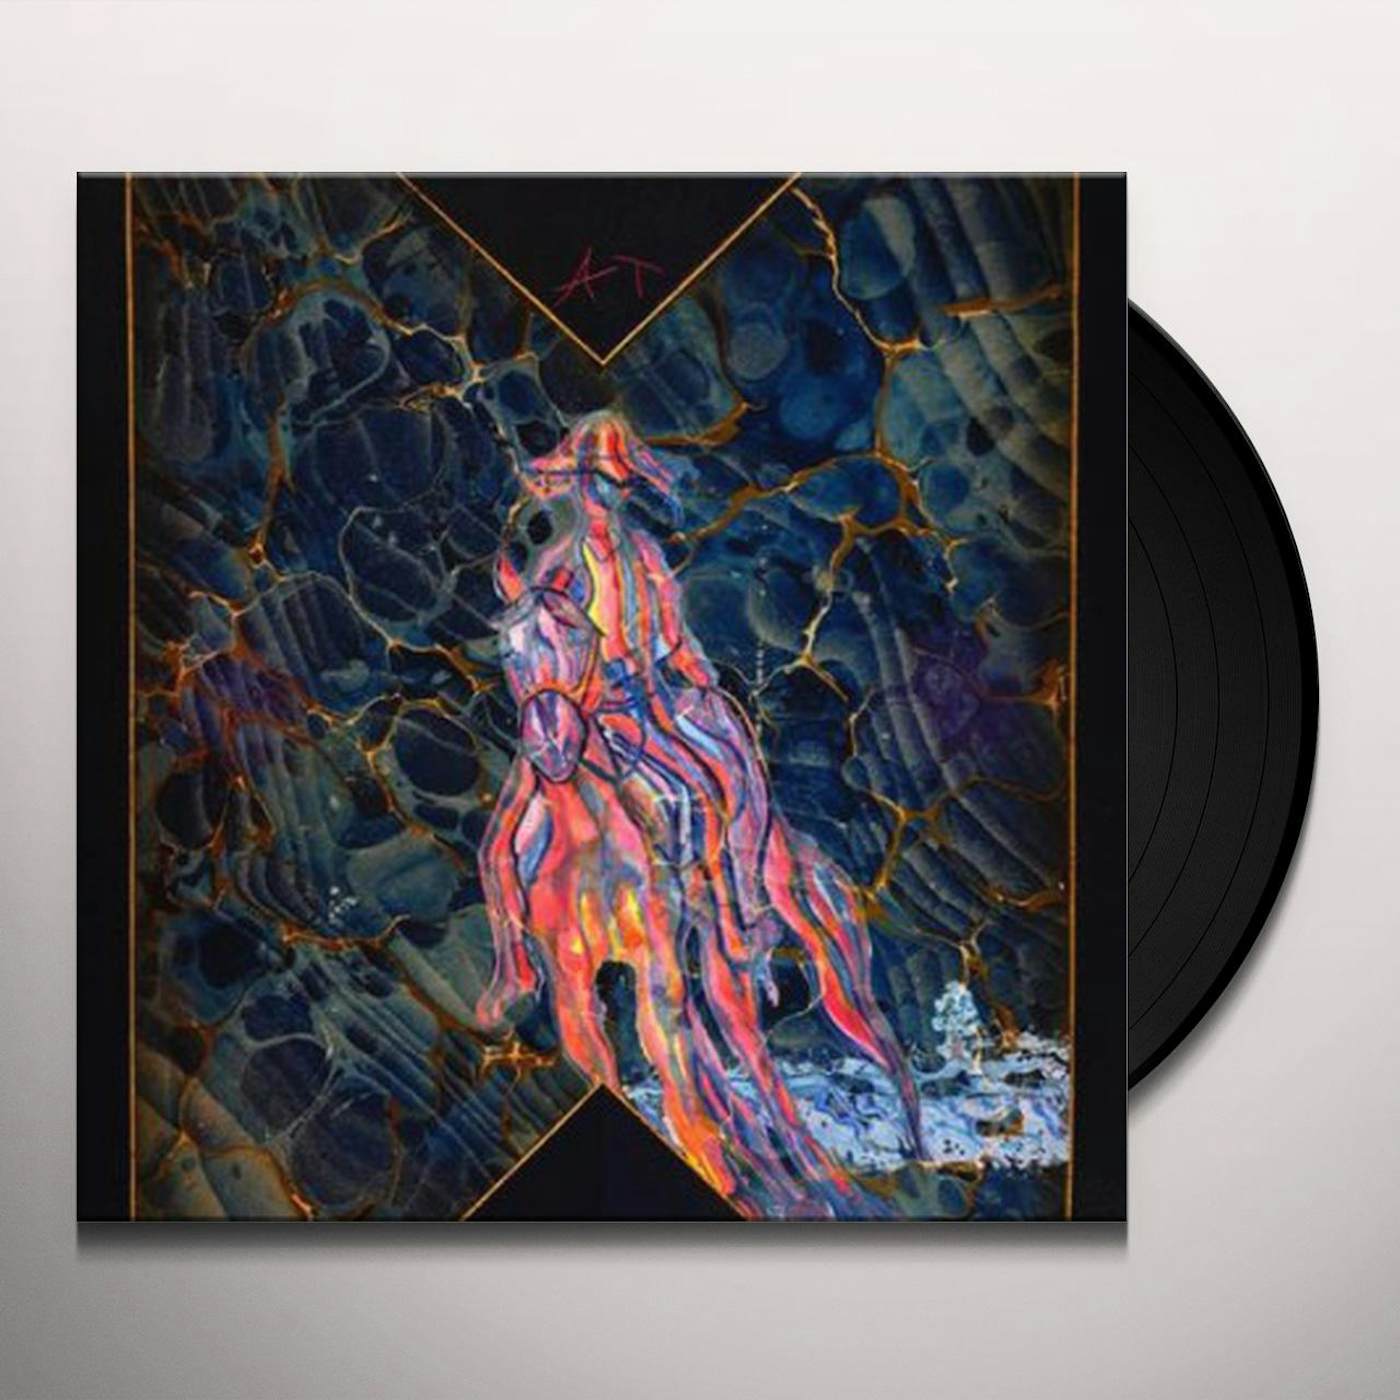 Avey Tare Cows on Hourglass Pond Vinyl Record